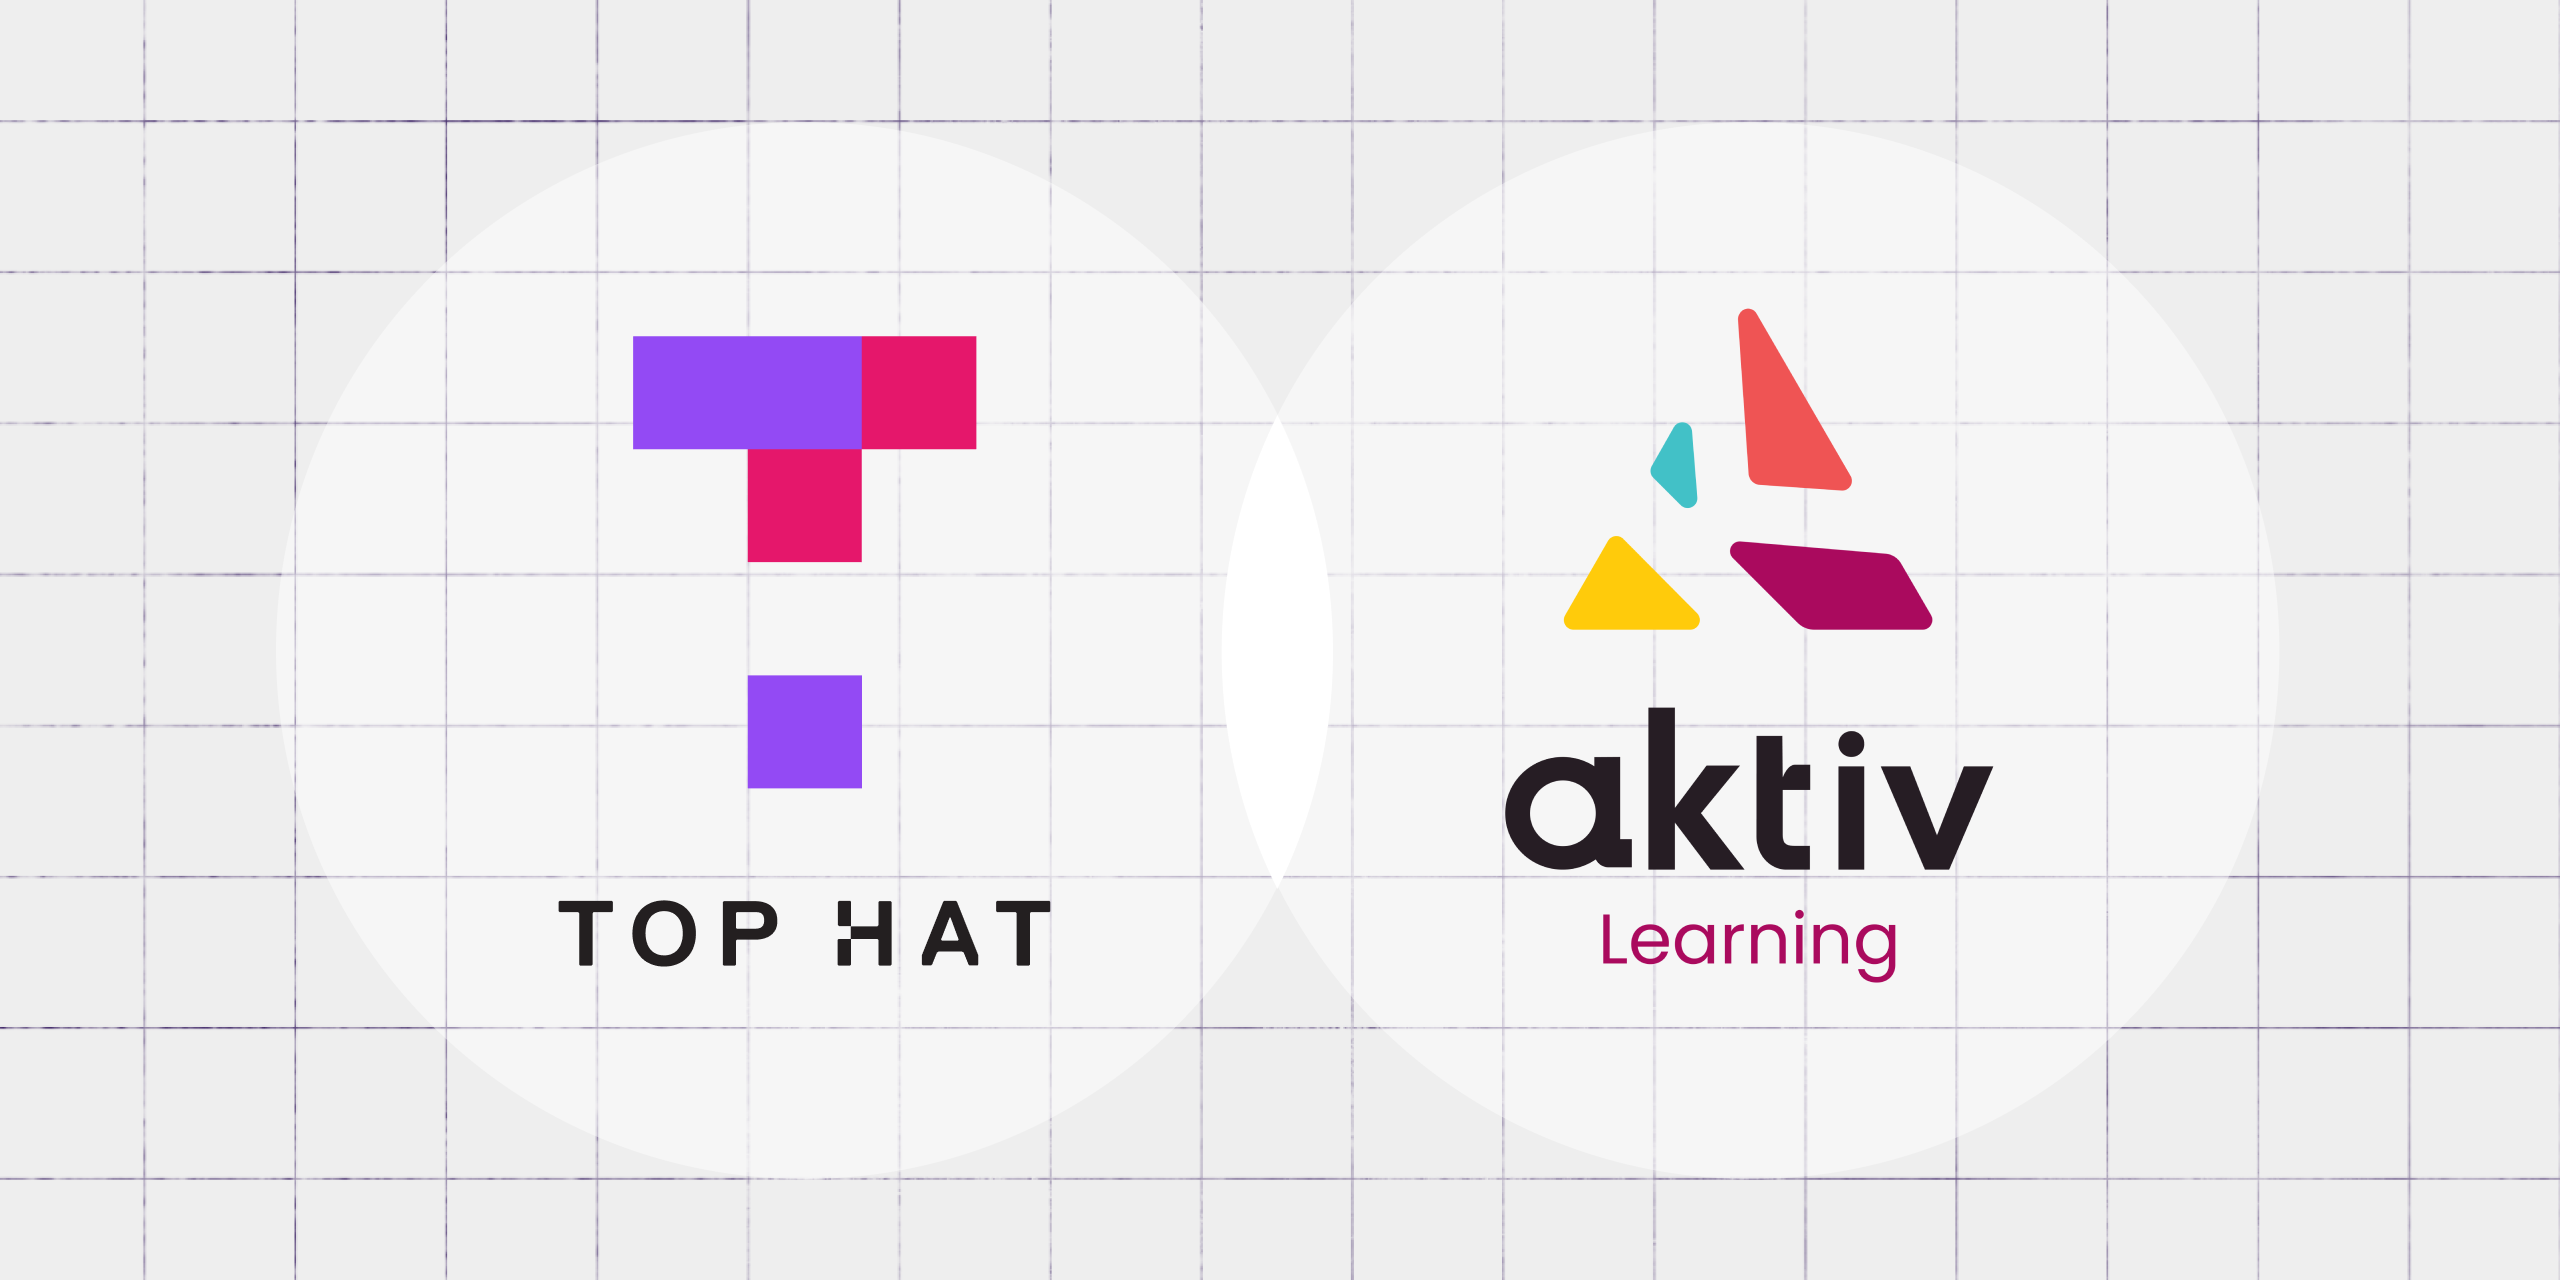 Top Hat is Acquiring Aktiv Learning to Transform STEM Education at Scale